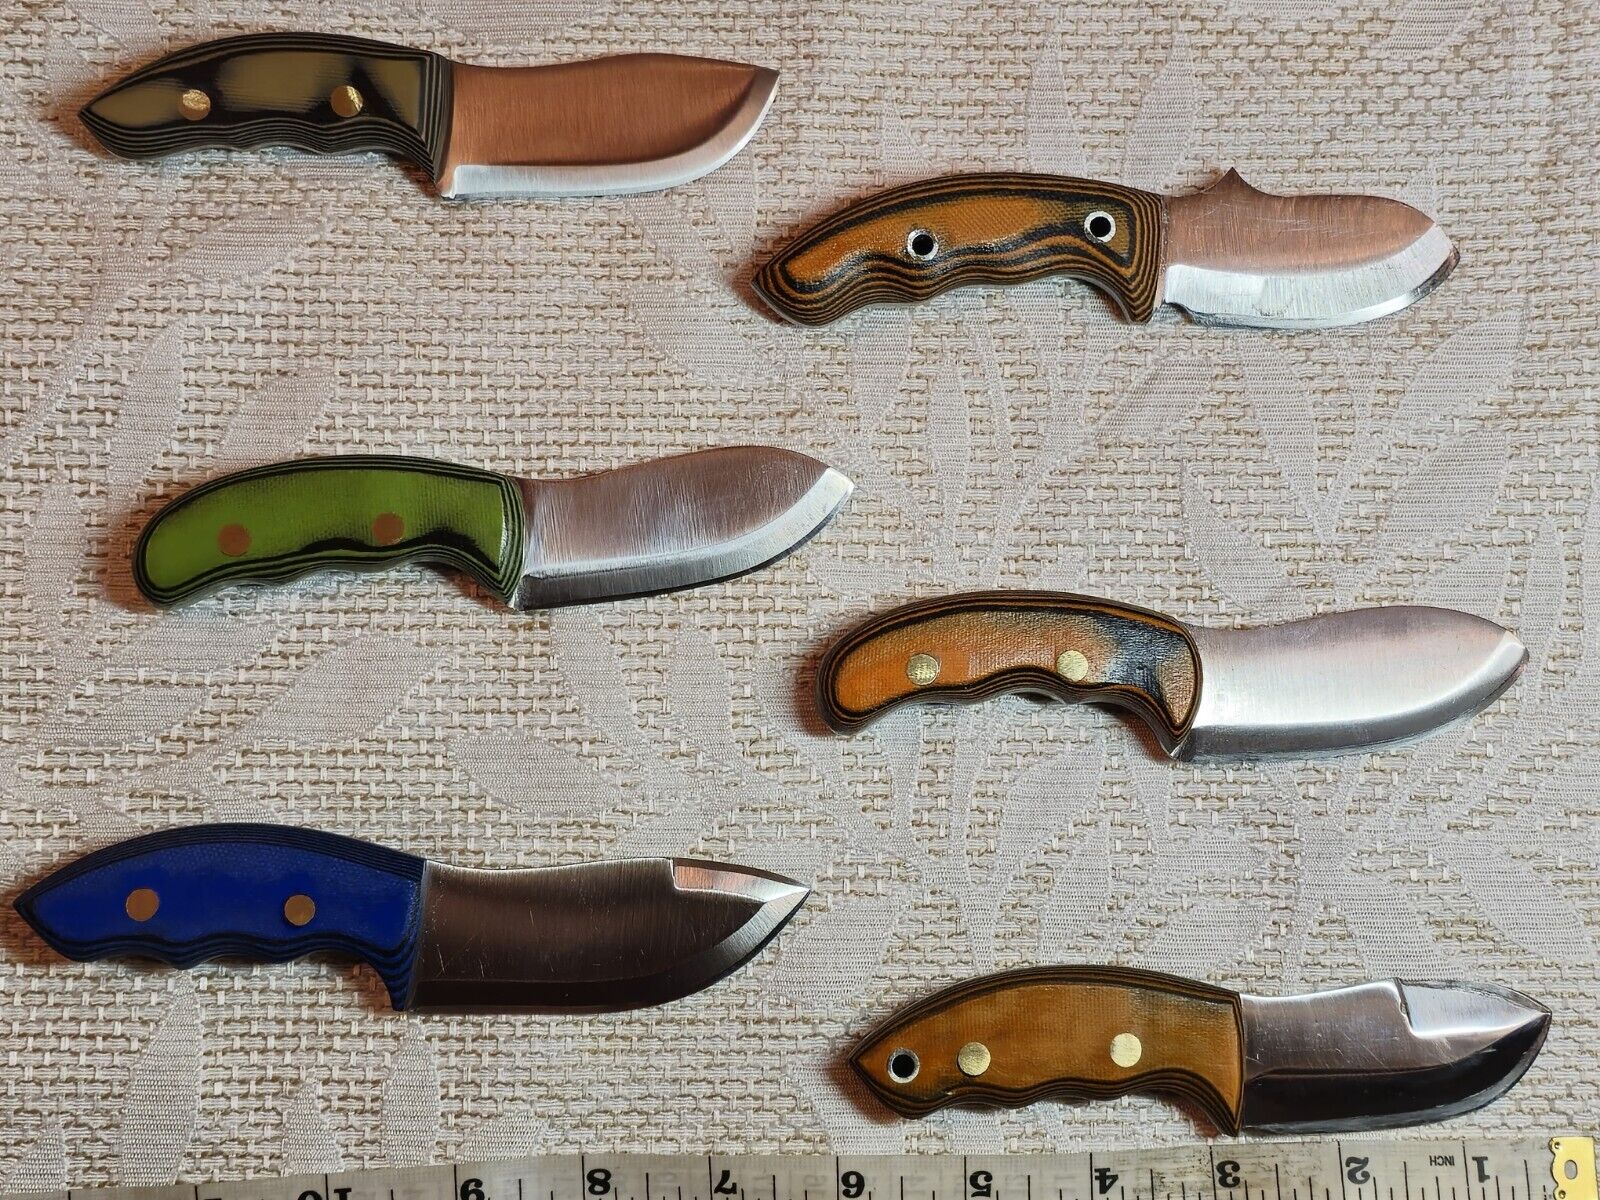 Klem Hand-made Crafted Knives (Small)